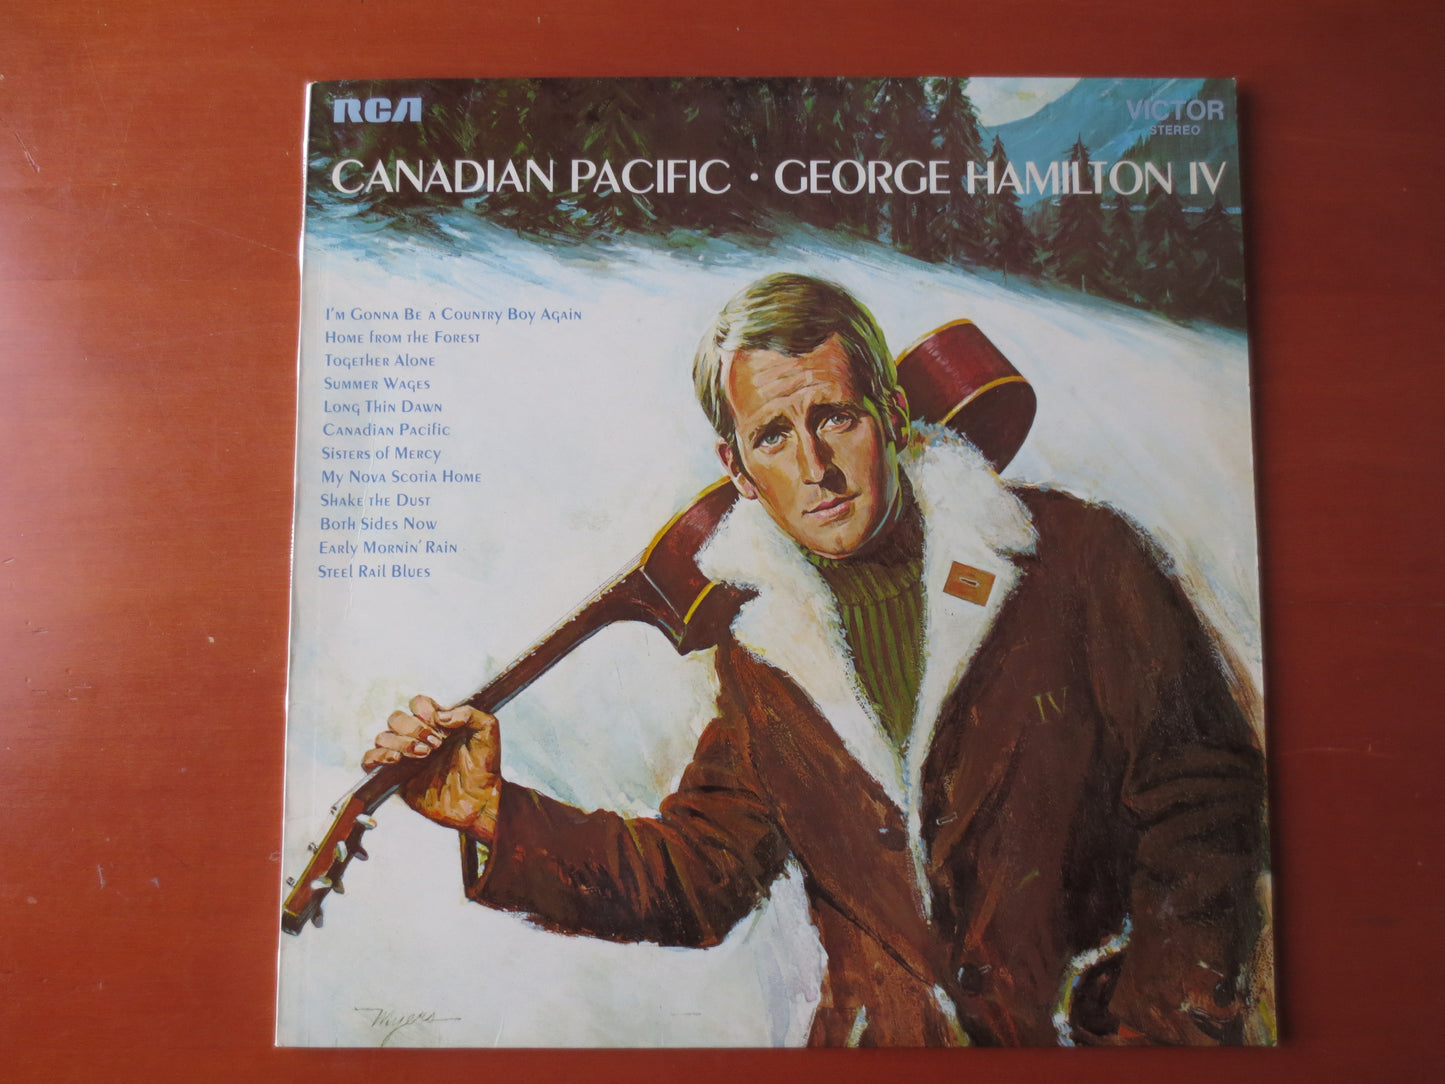 GEORGE HAMILTON IV, Canadian Pacific, Country Record, Country Album, Country Vinyl, Country Lp, Vintage Vinyl, 1969 Records